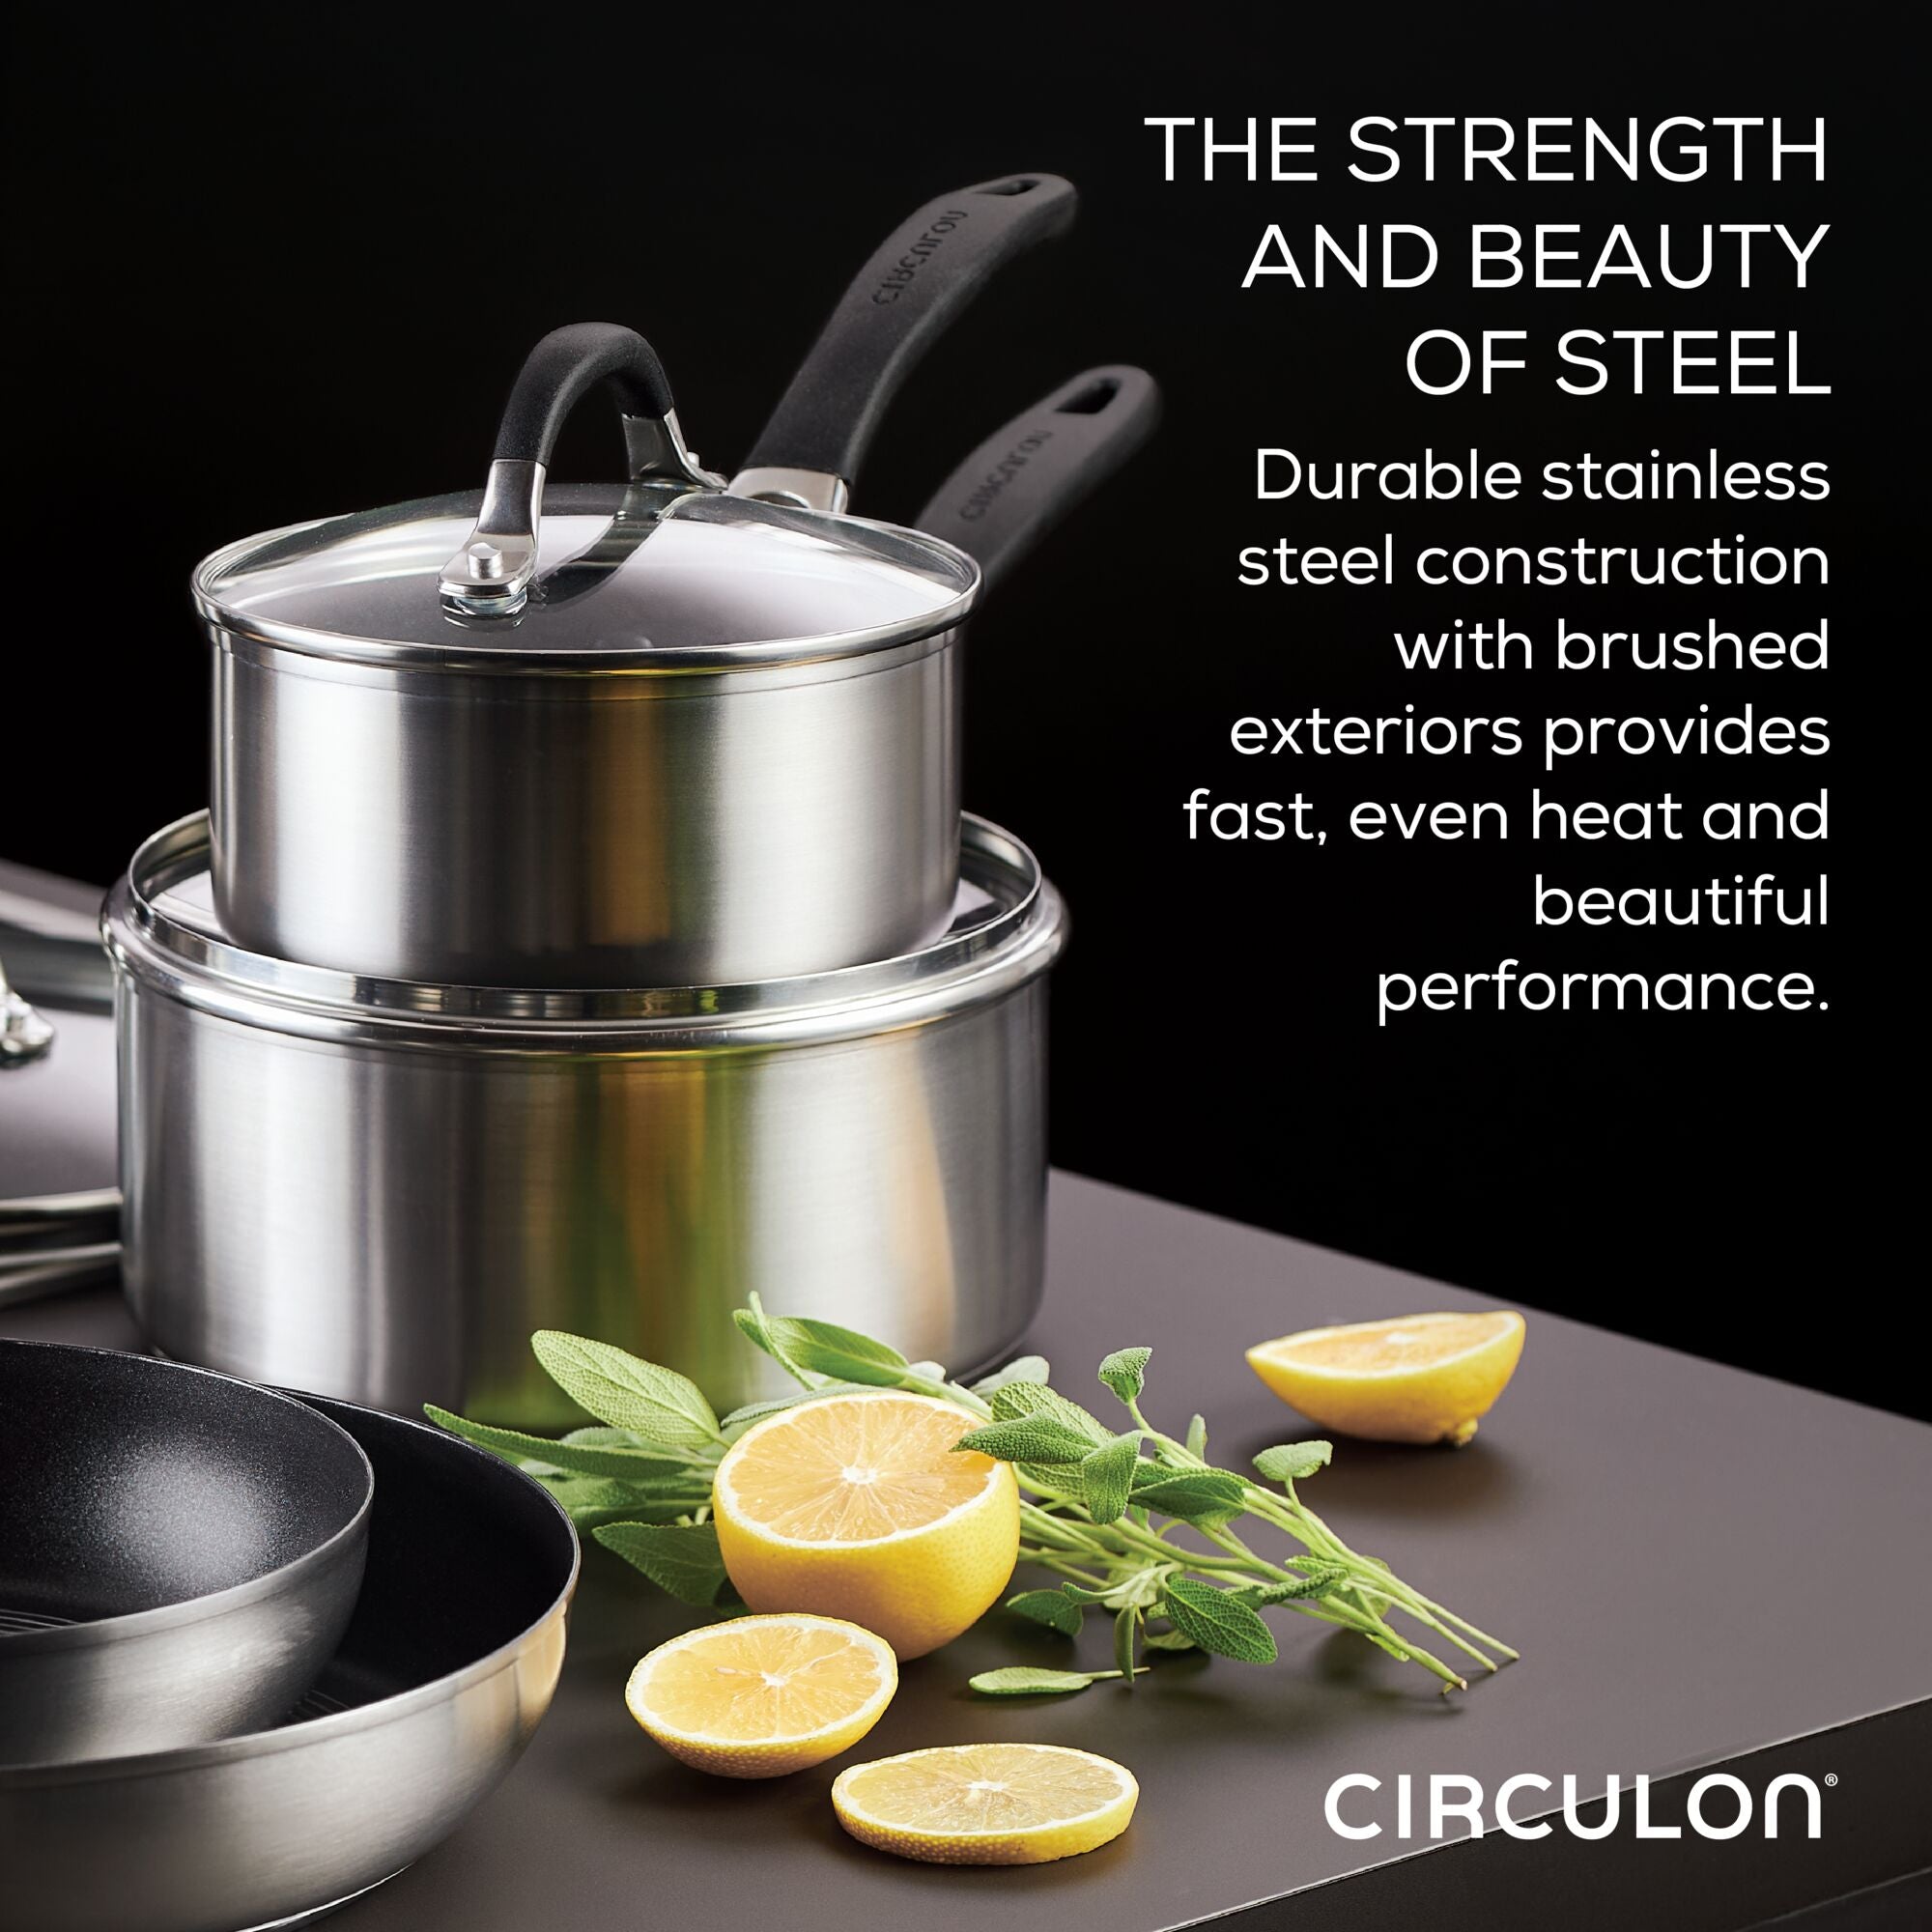 Circulon Clad Stainless Steel Cookware/Pots and Pans and Utensil Set with  Hybrid SteelShield and Nonstick Technology, 11 Piece - Silver